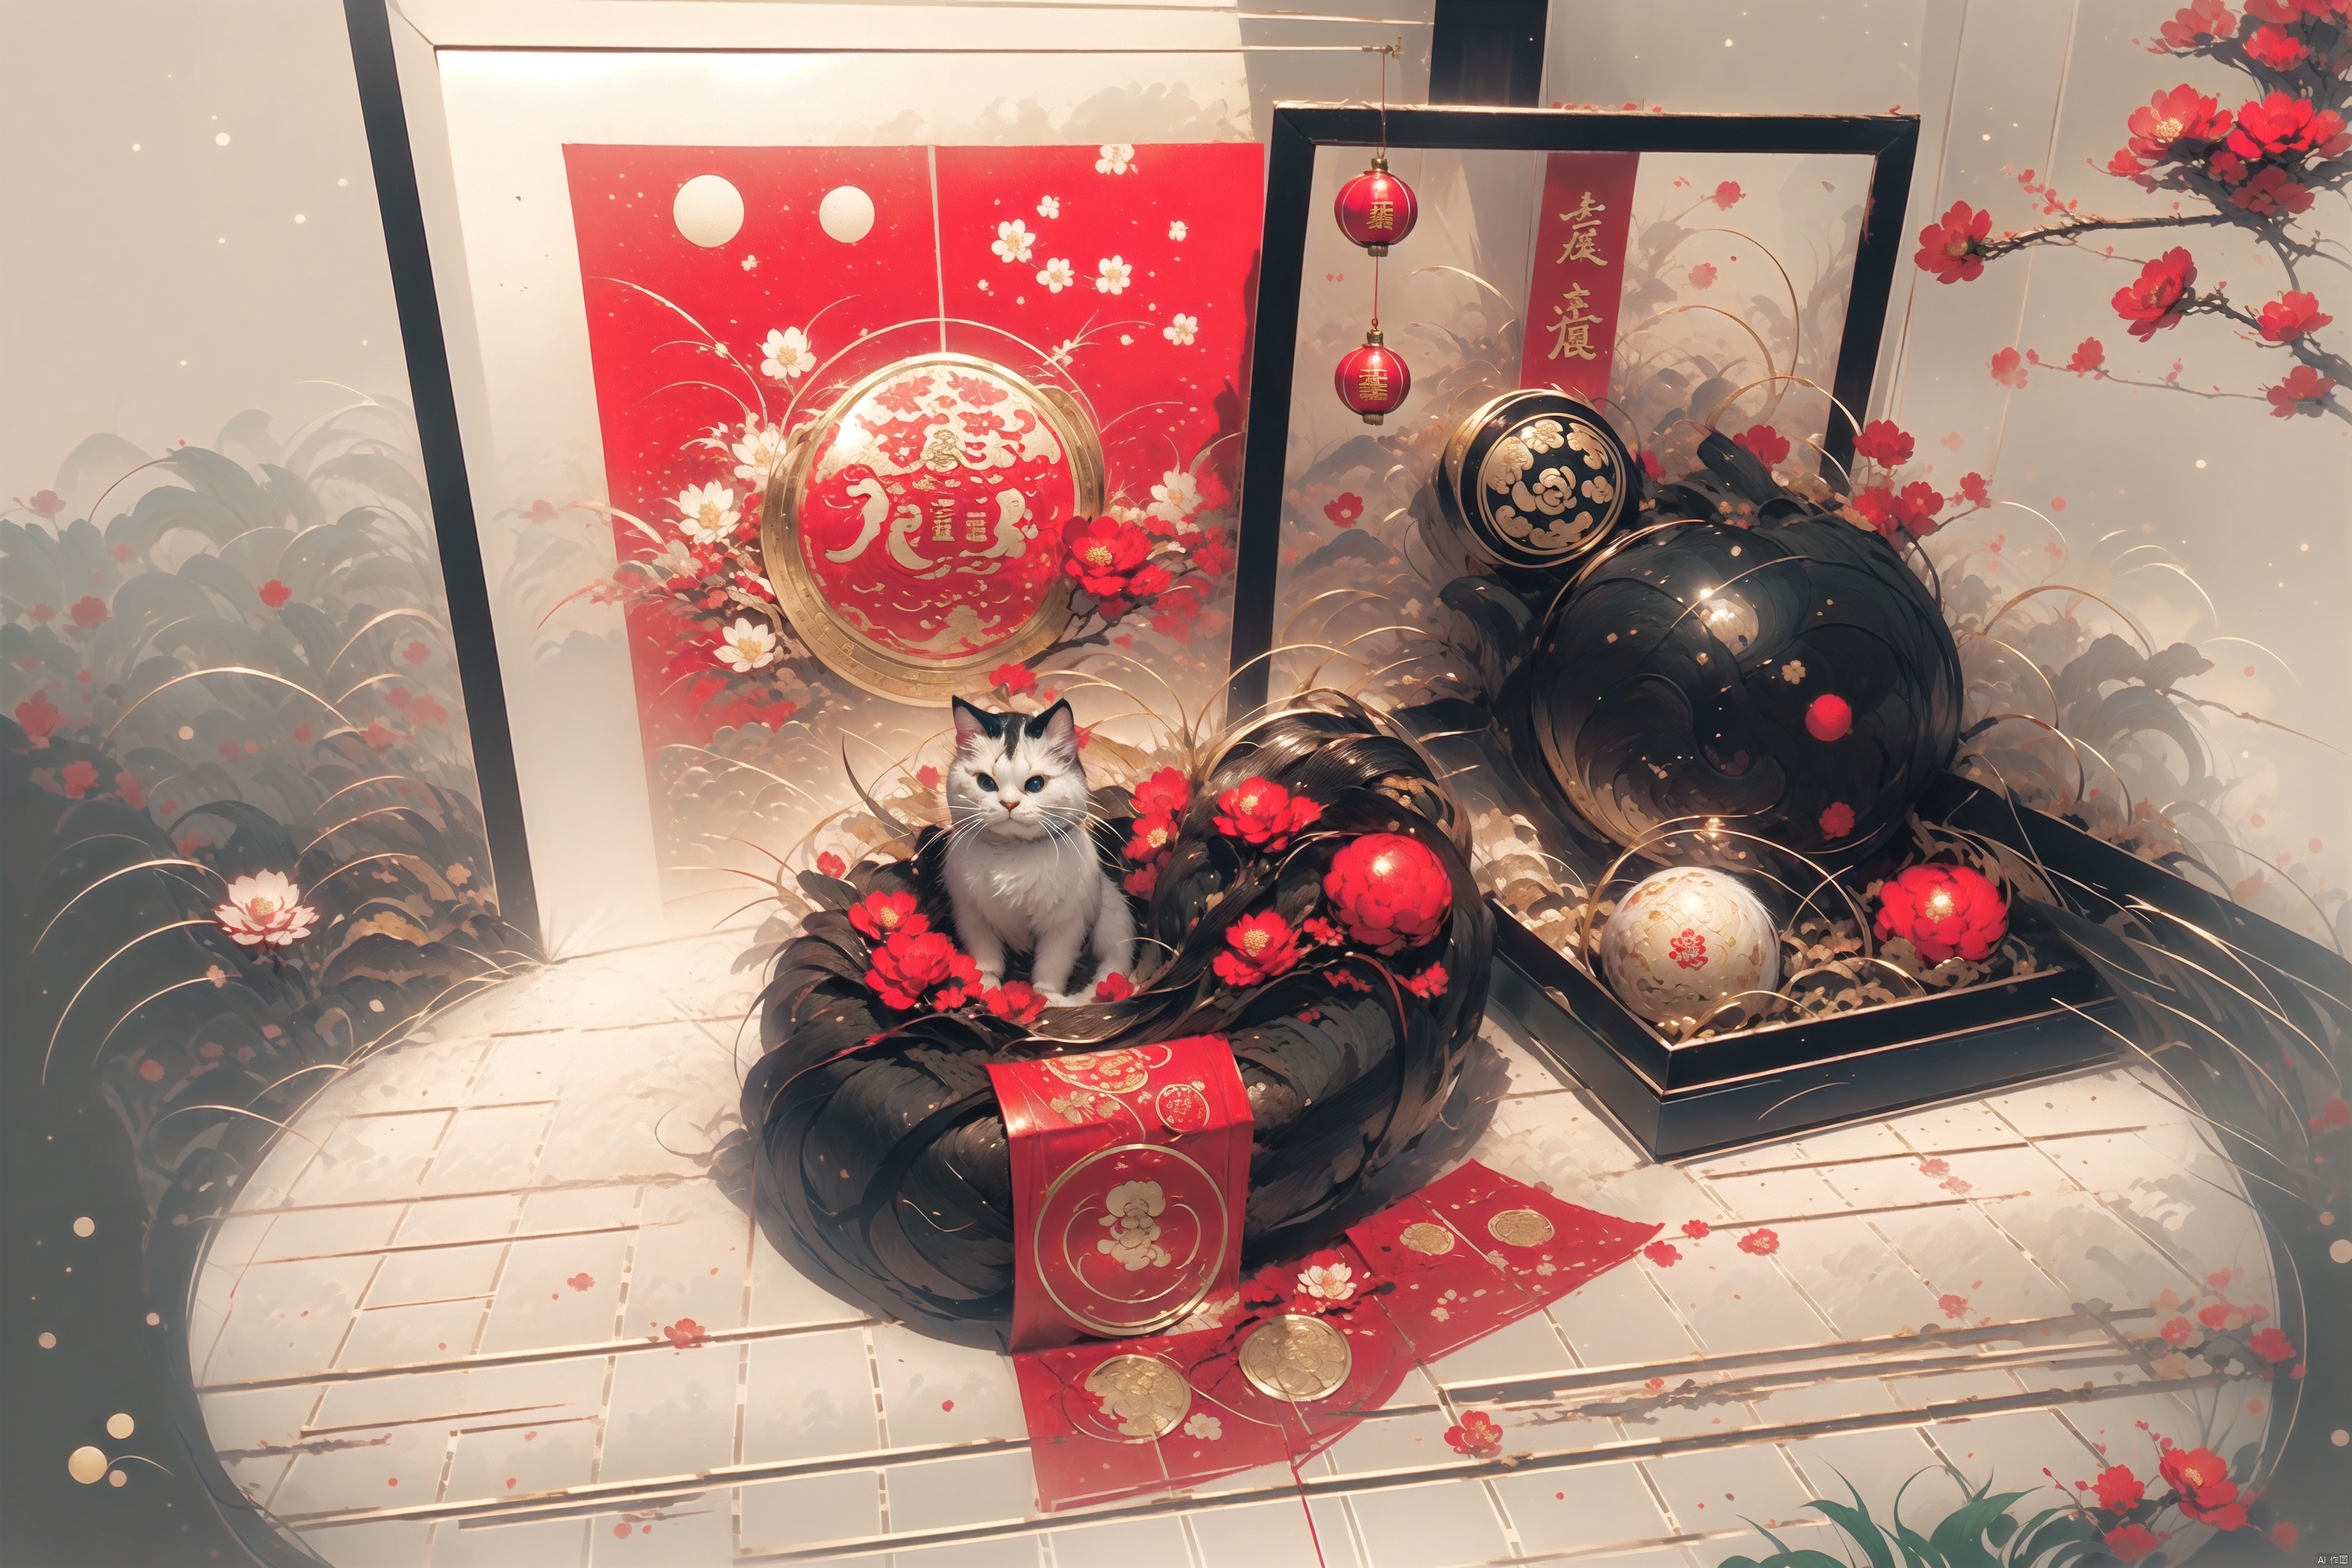  China year, annual flavor, ornaments, Lucky cat, picture frame, rockery, orange, bergamot, red envelope, lotus, seal, green plant. wu, 2D ConceptualDesign, cozy animation scenes, backlight, , sketch style, (\tong hua cheng bao\), JHJH, chinese new year,Maneki-neko